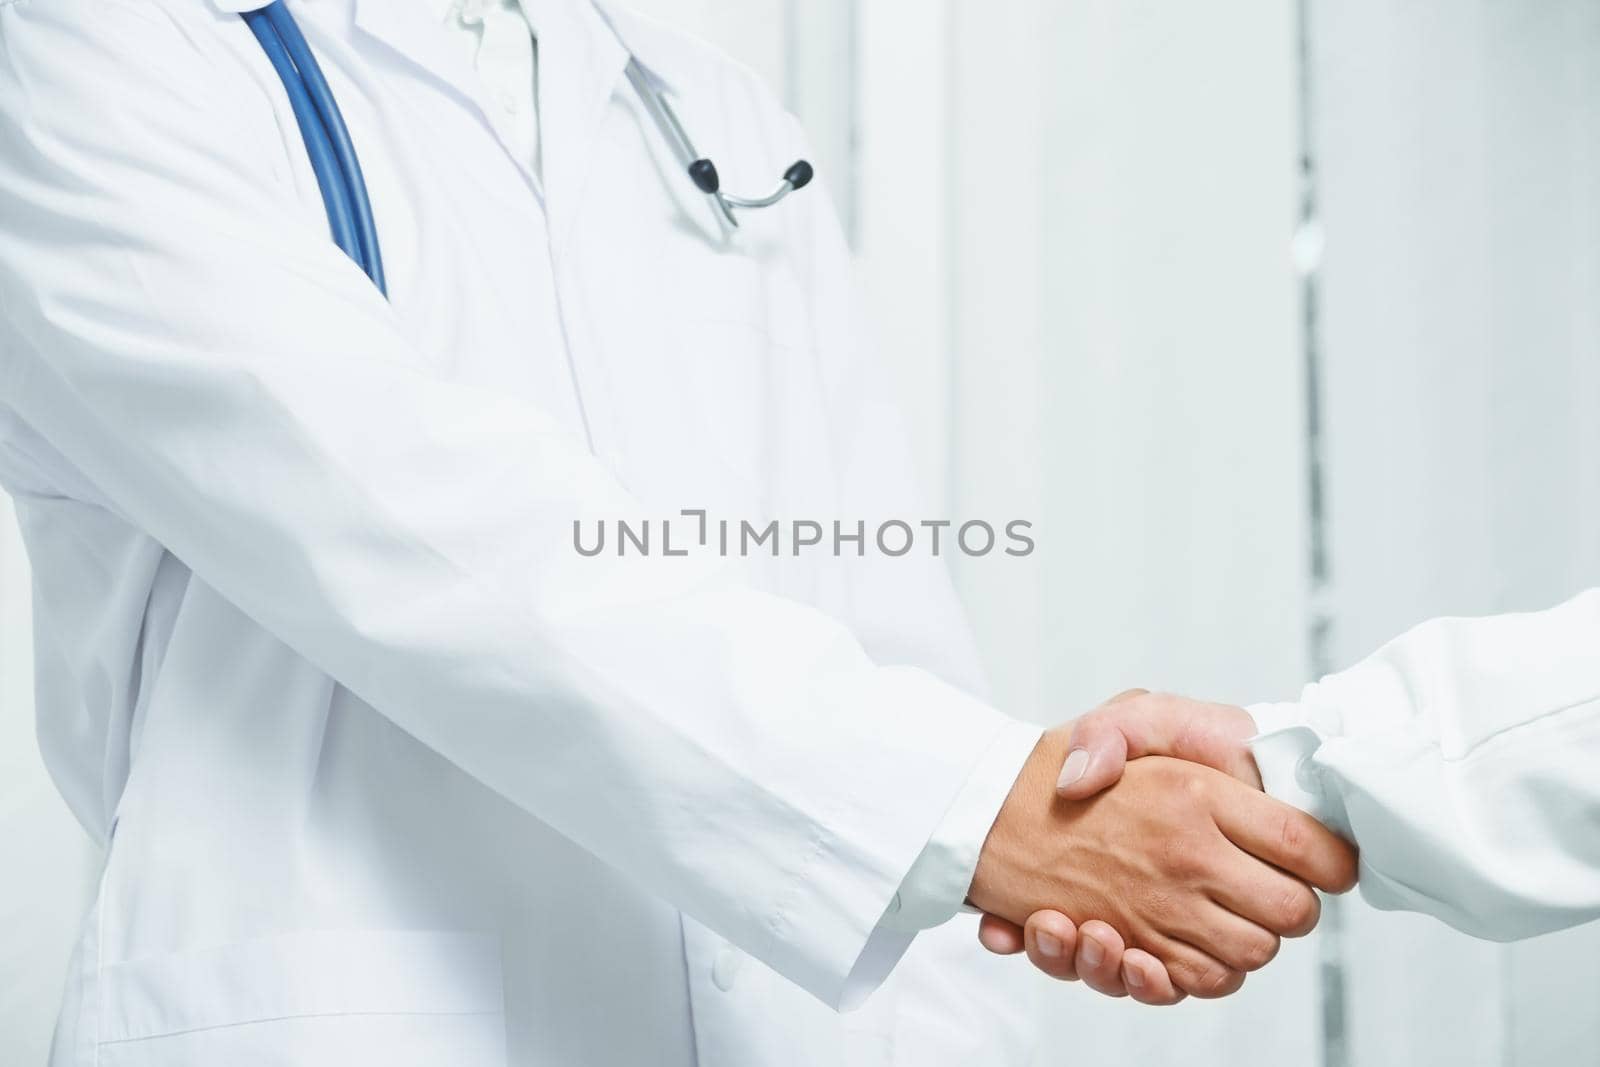 Man doctor shakes hand with another doctor in hospital, close-up image, face is not visible, concept of teamwork